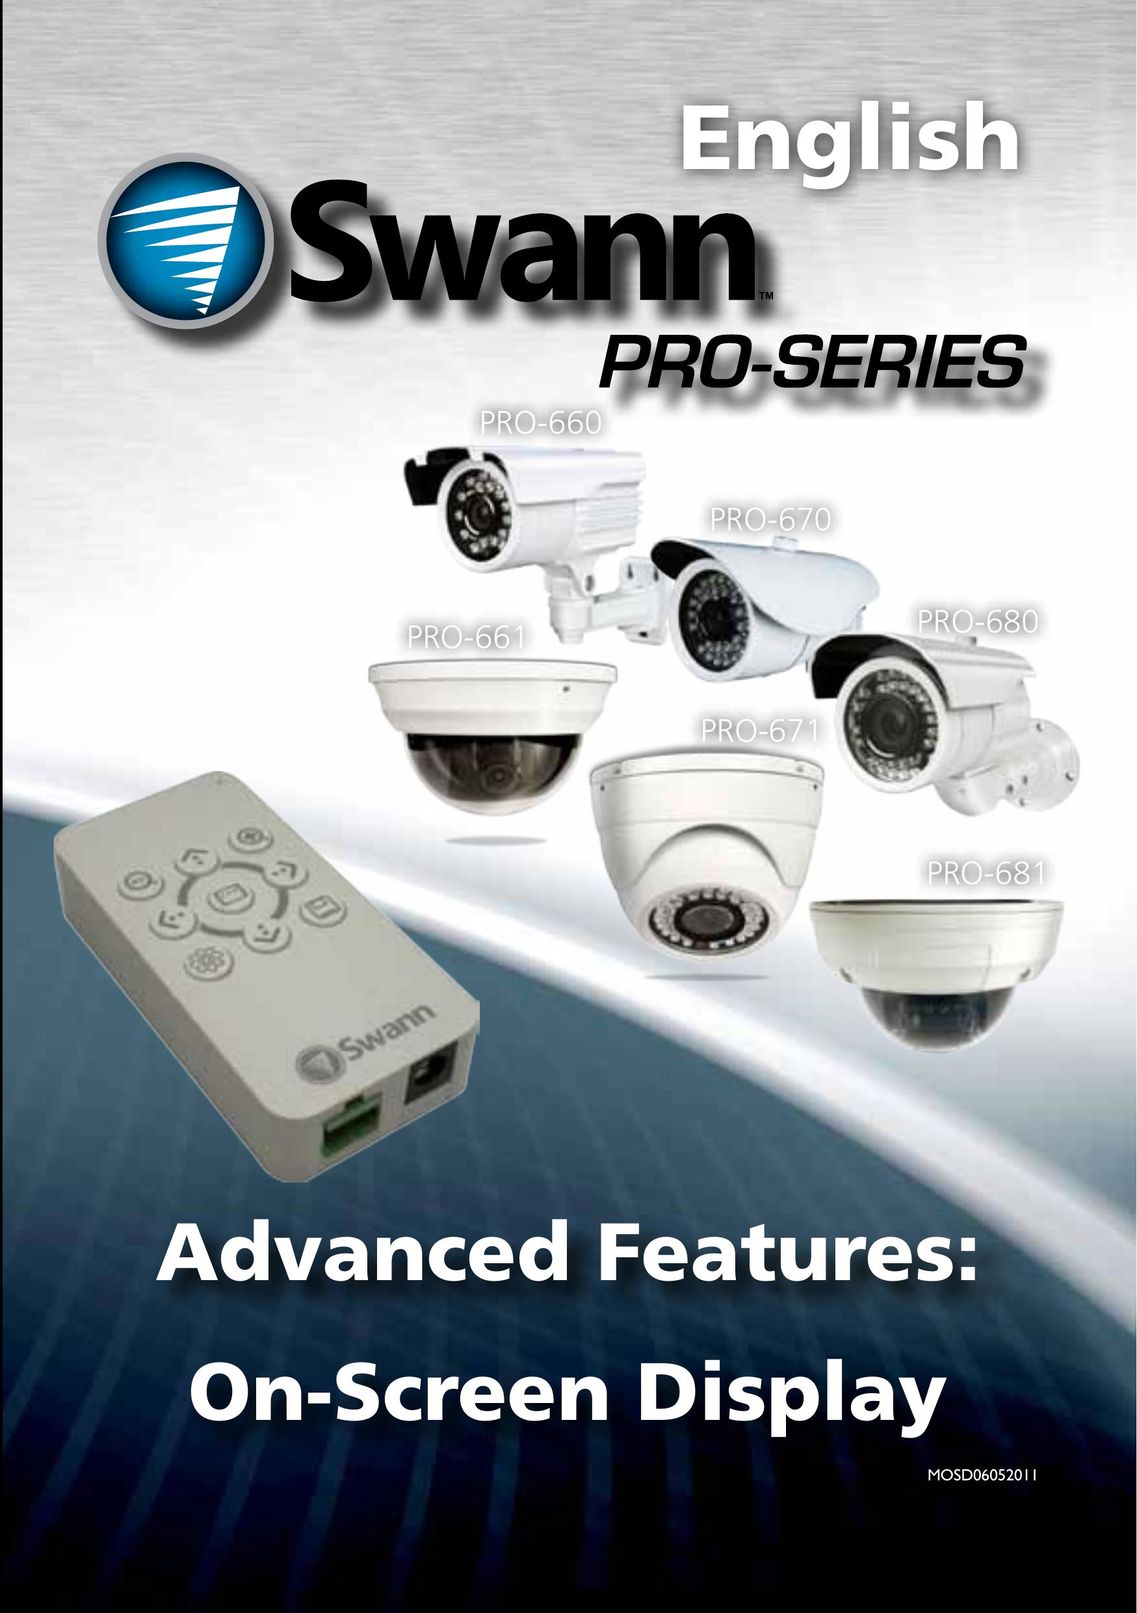 Swann PRO-670 Home Security System User Manual